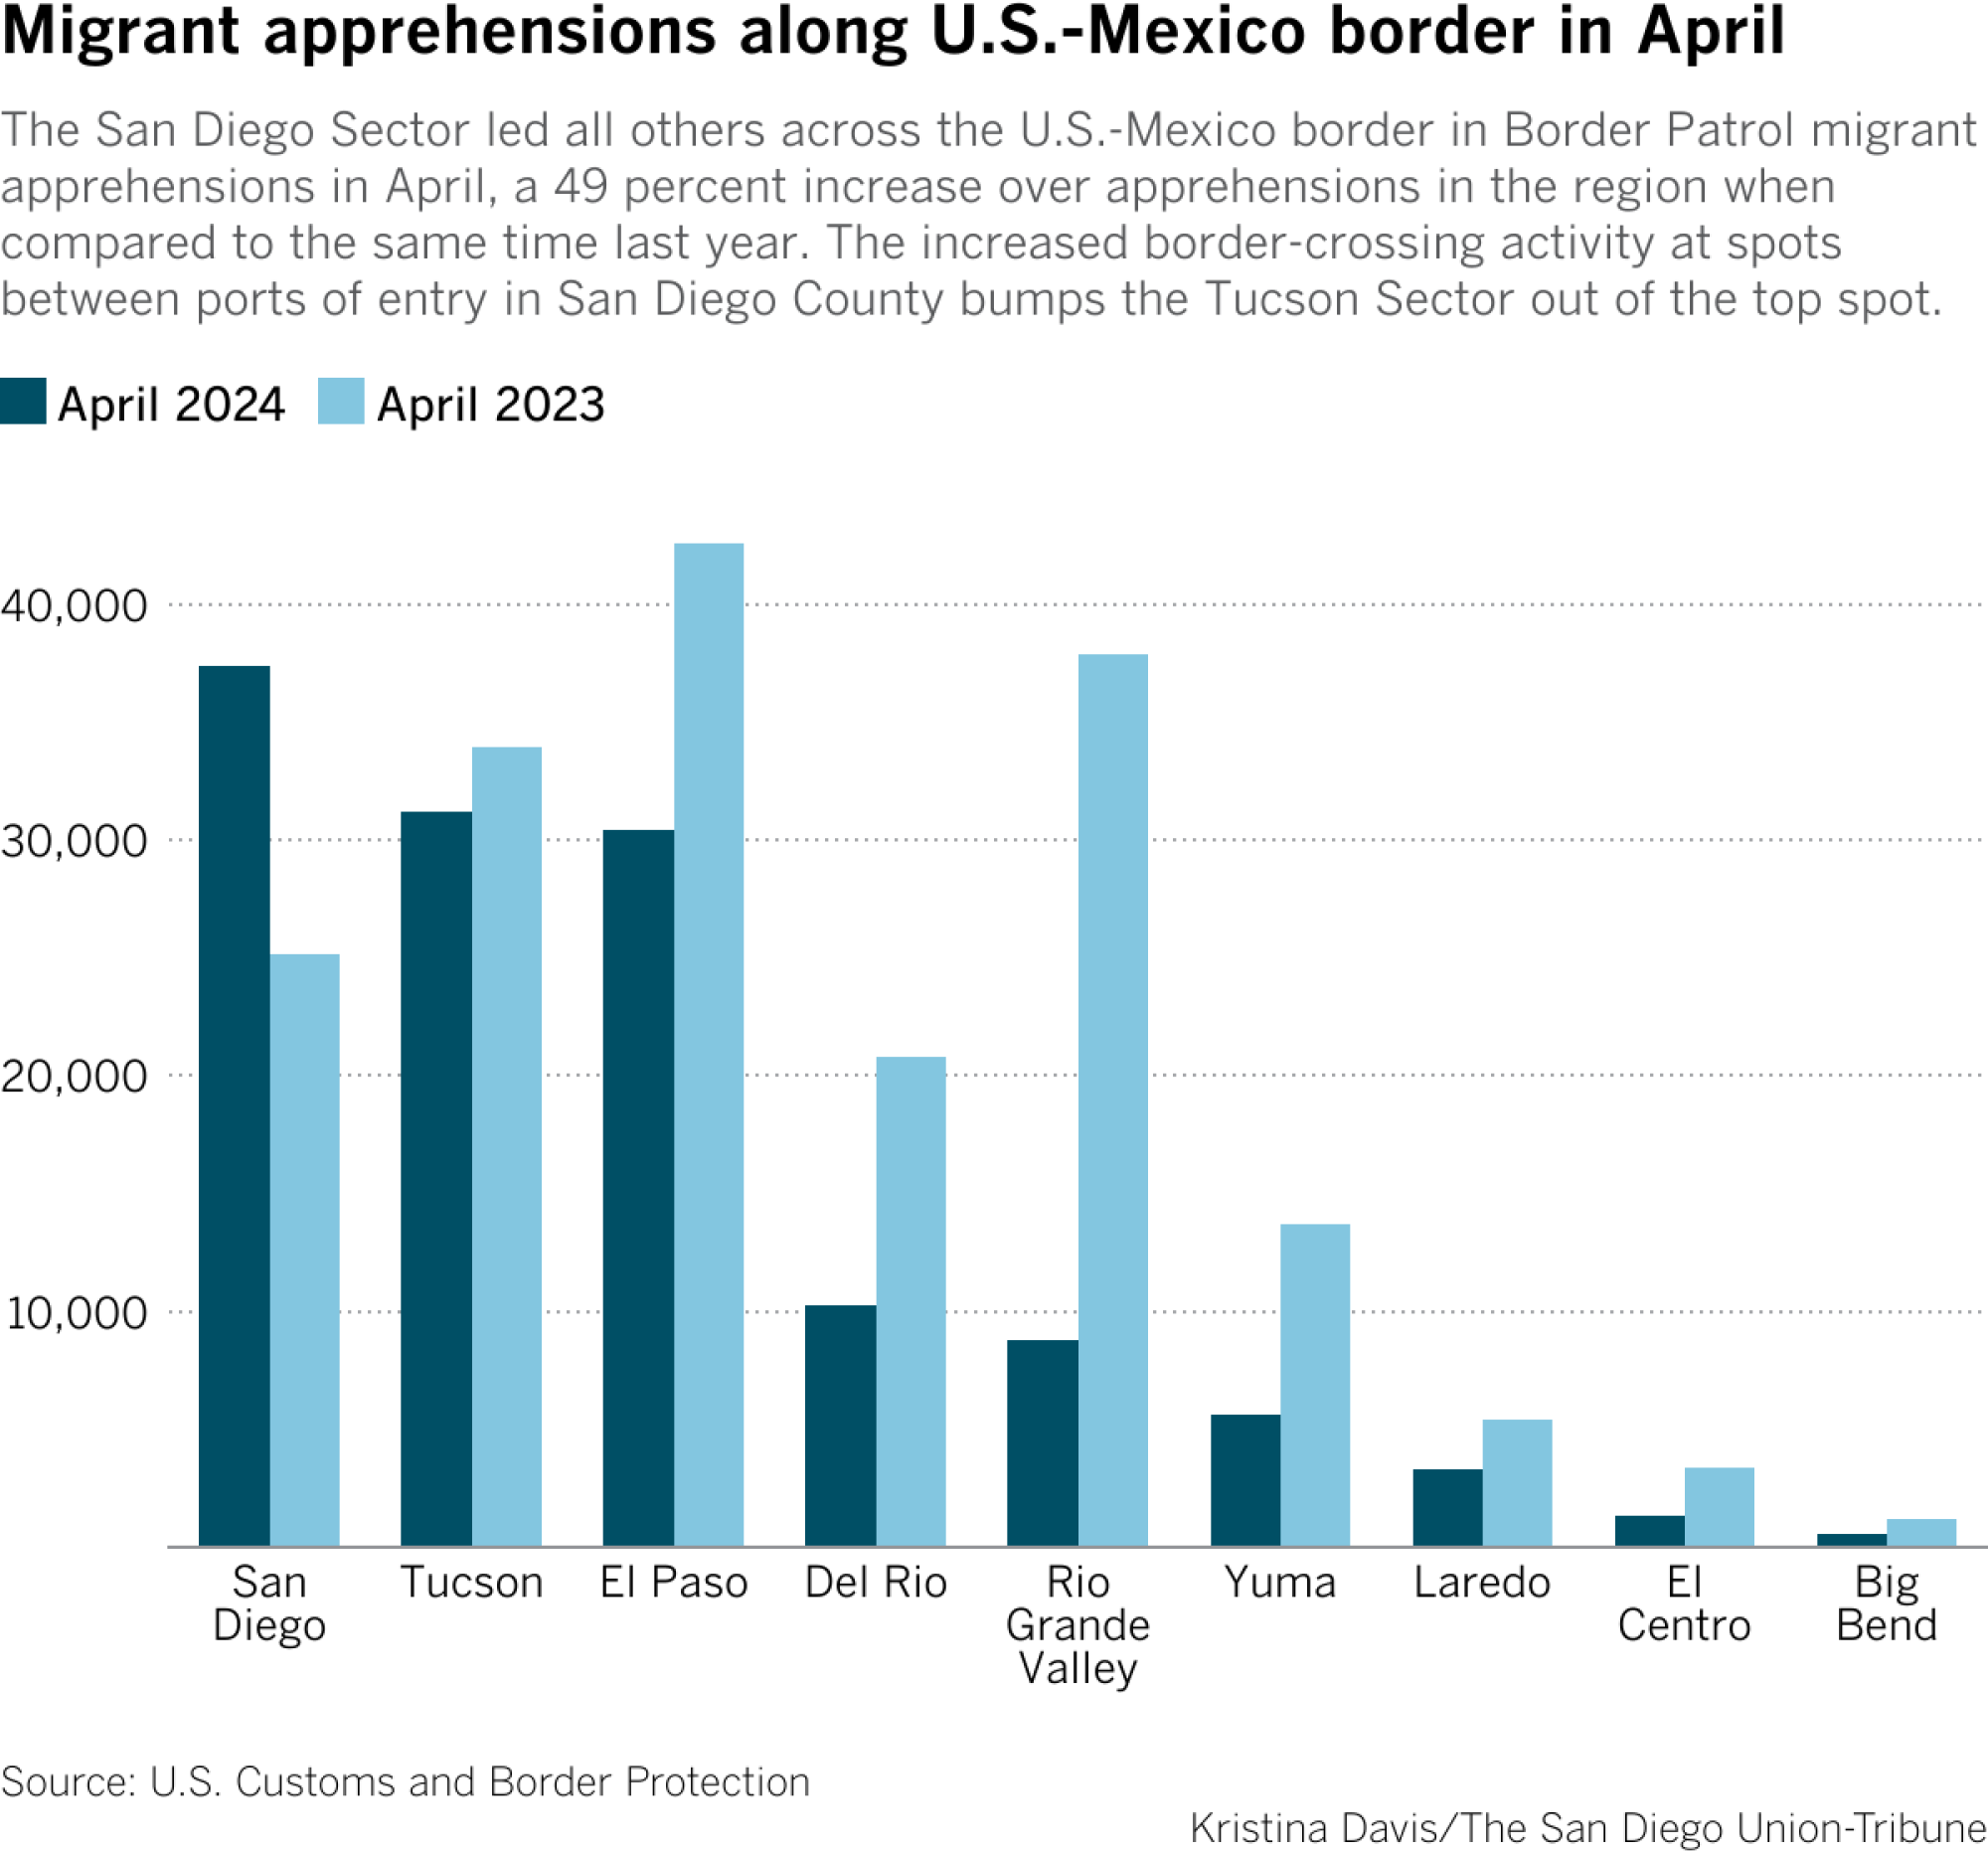 The San Diego sector led all other sectors across the U.S.-Mexico border in Border Patrol migrant apprehensions in April, a 49% increase over arrests in the region compared to the same period last year.  Increased border activity between San Diego County ports of entry pushes the Tucson sector out of the top spot.